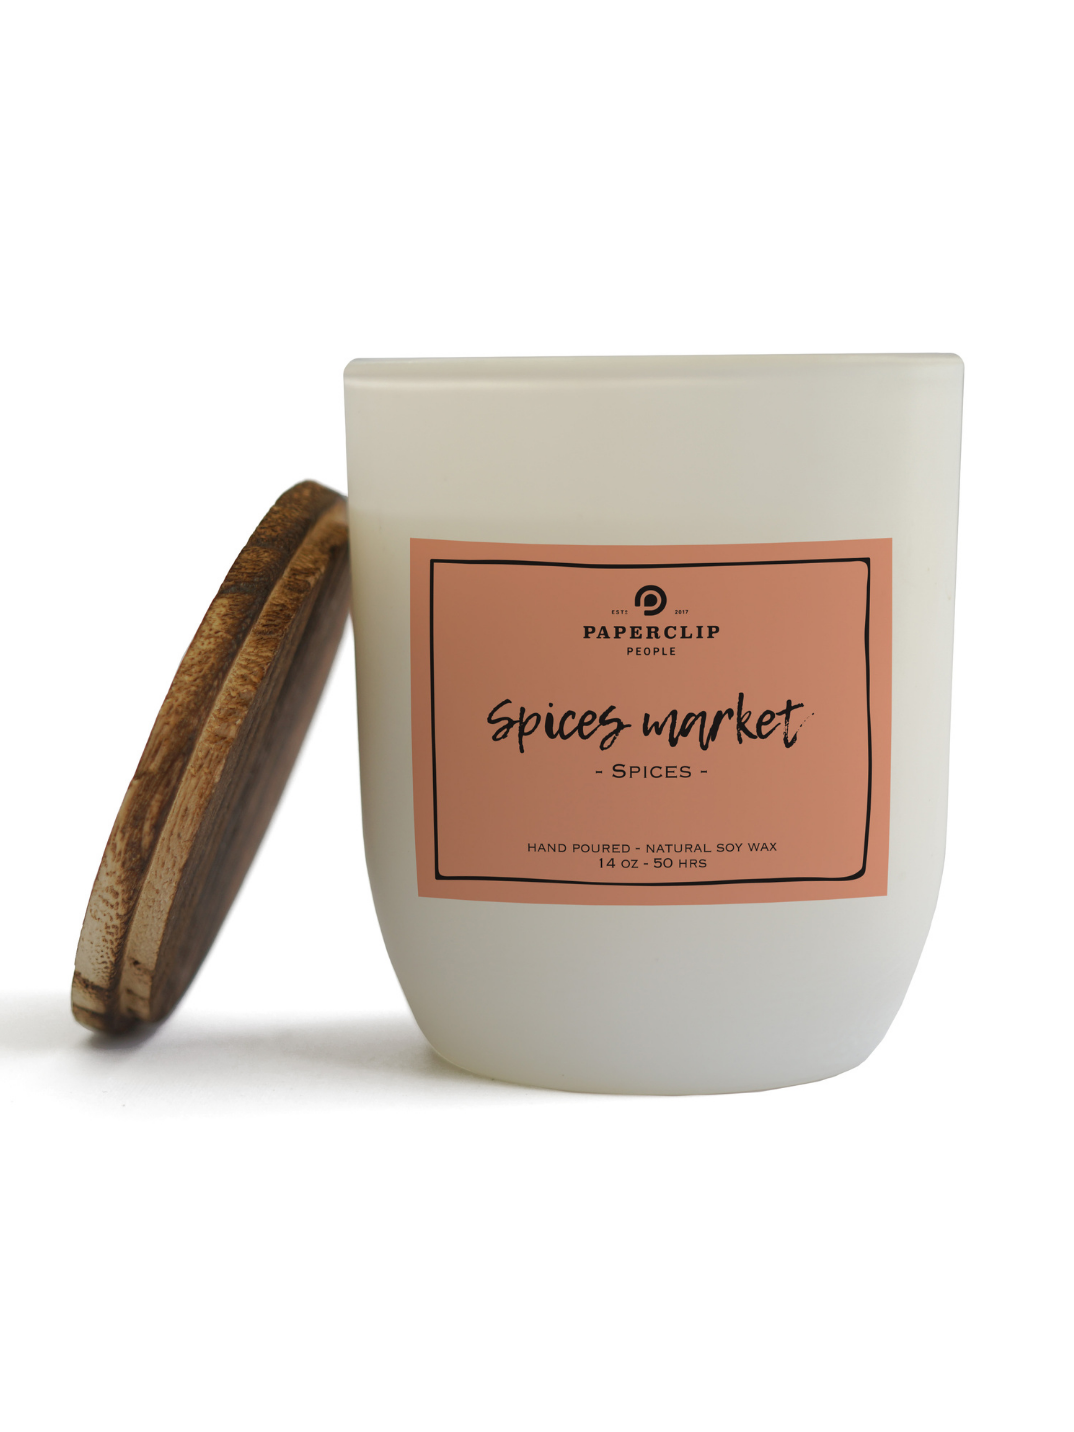 hand-poured natural soy wax candle made in Bali, Indonesia shop now spices scented candle